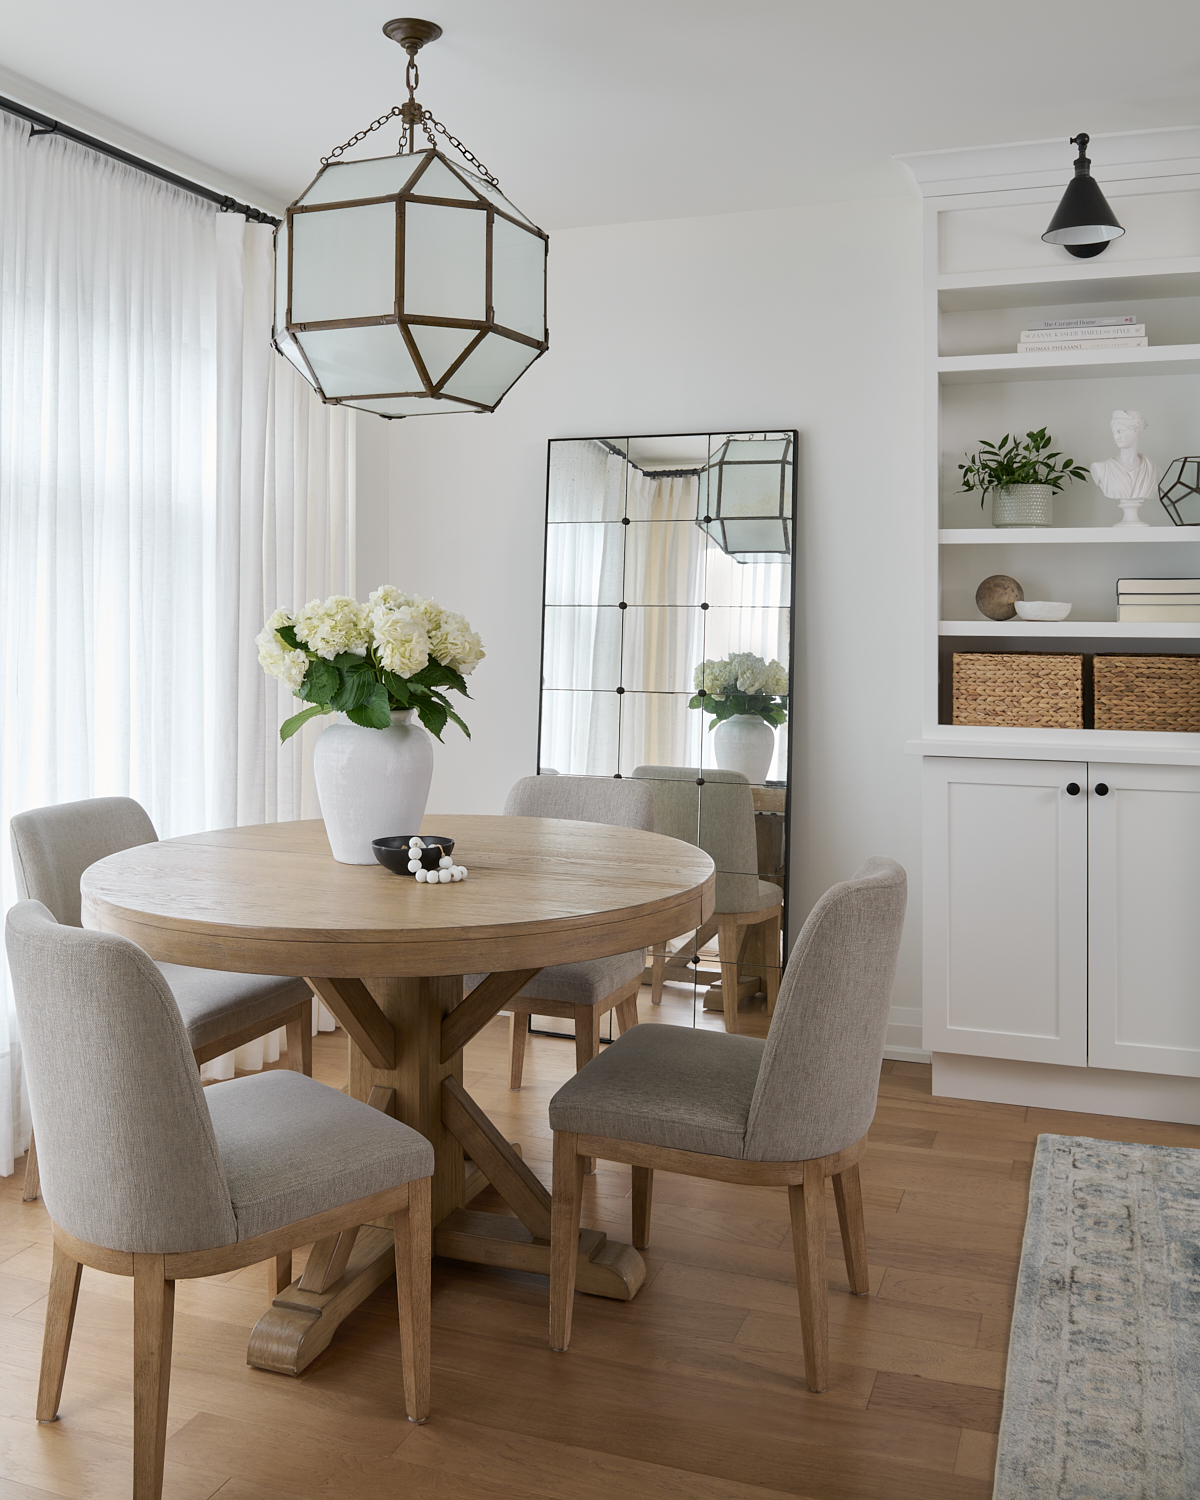 Dining room image with white oak round dining table surrounded with neutral upholstered chairs. White linen drapery behind and a wrought iron light fixture above.